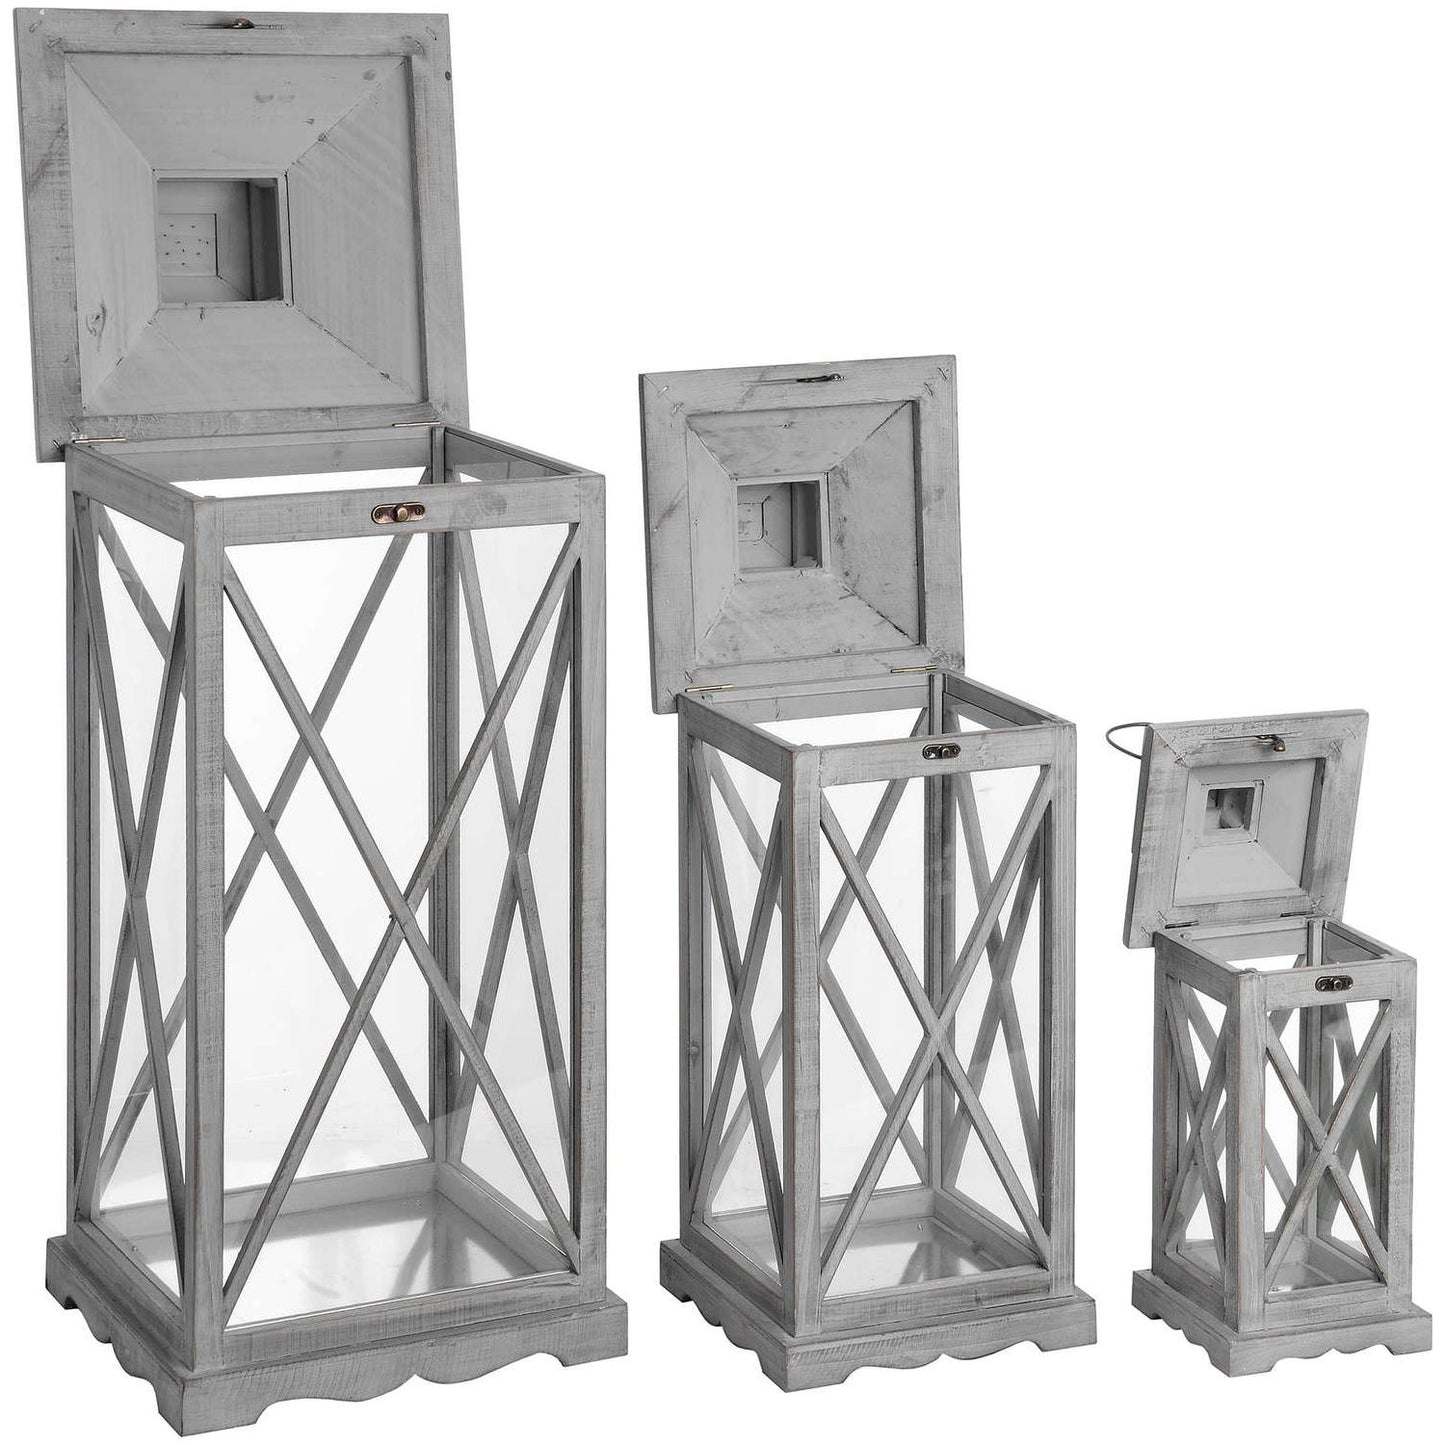 Set Of Three Wooden Lanterns With Traditional Cross Section - Ashton and Finch